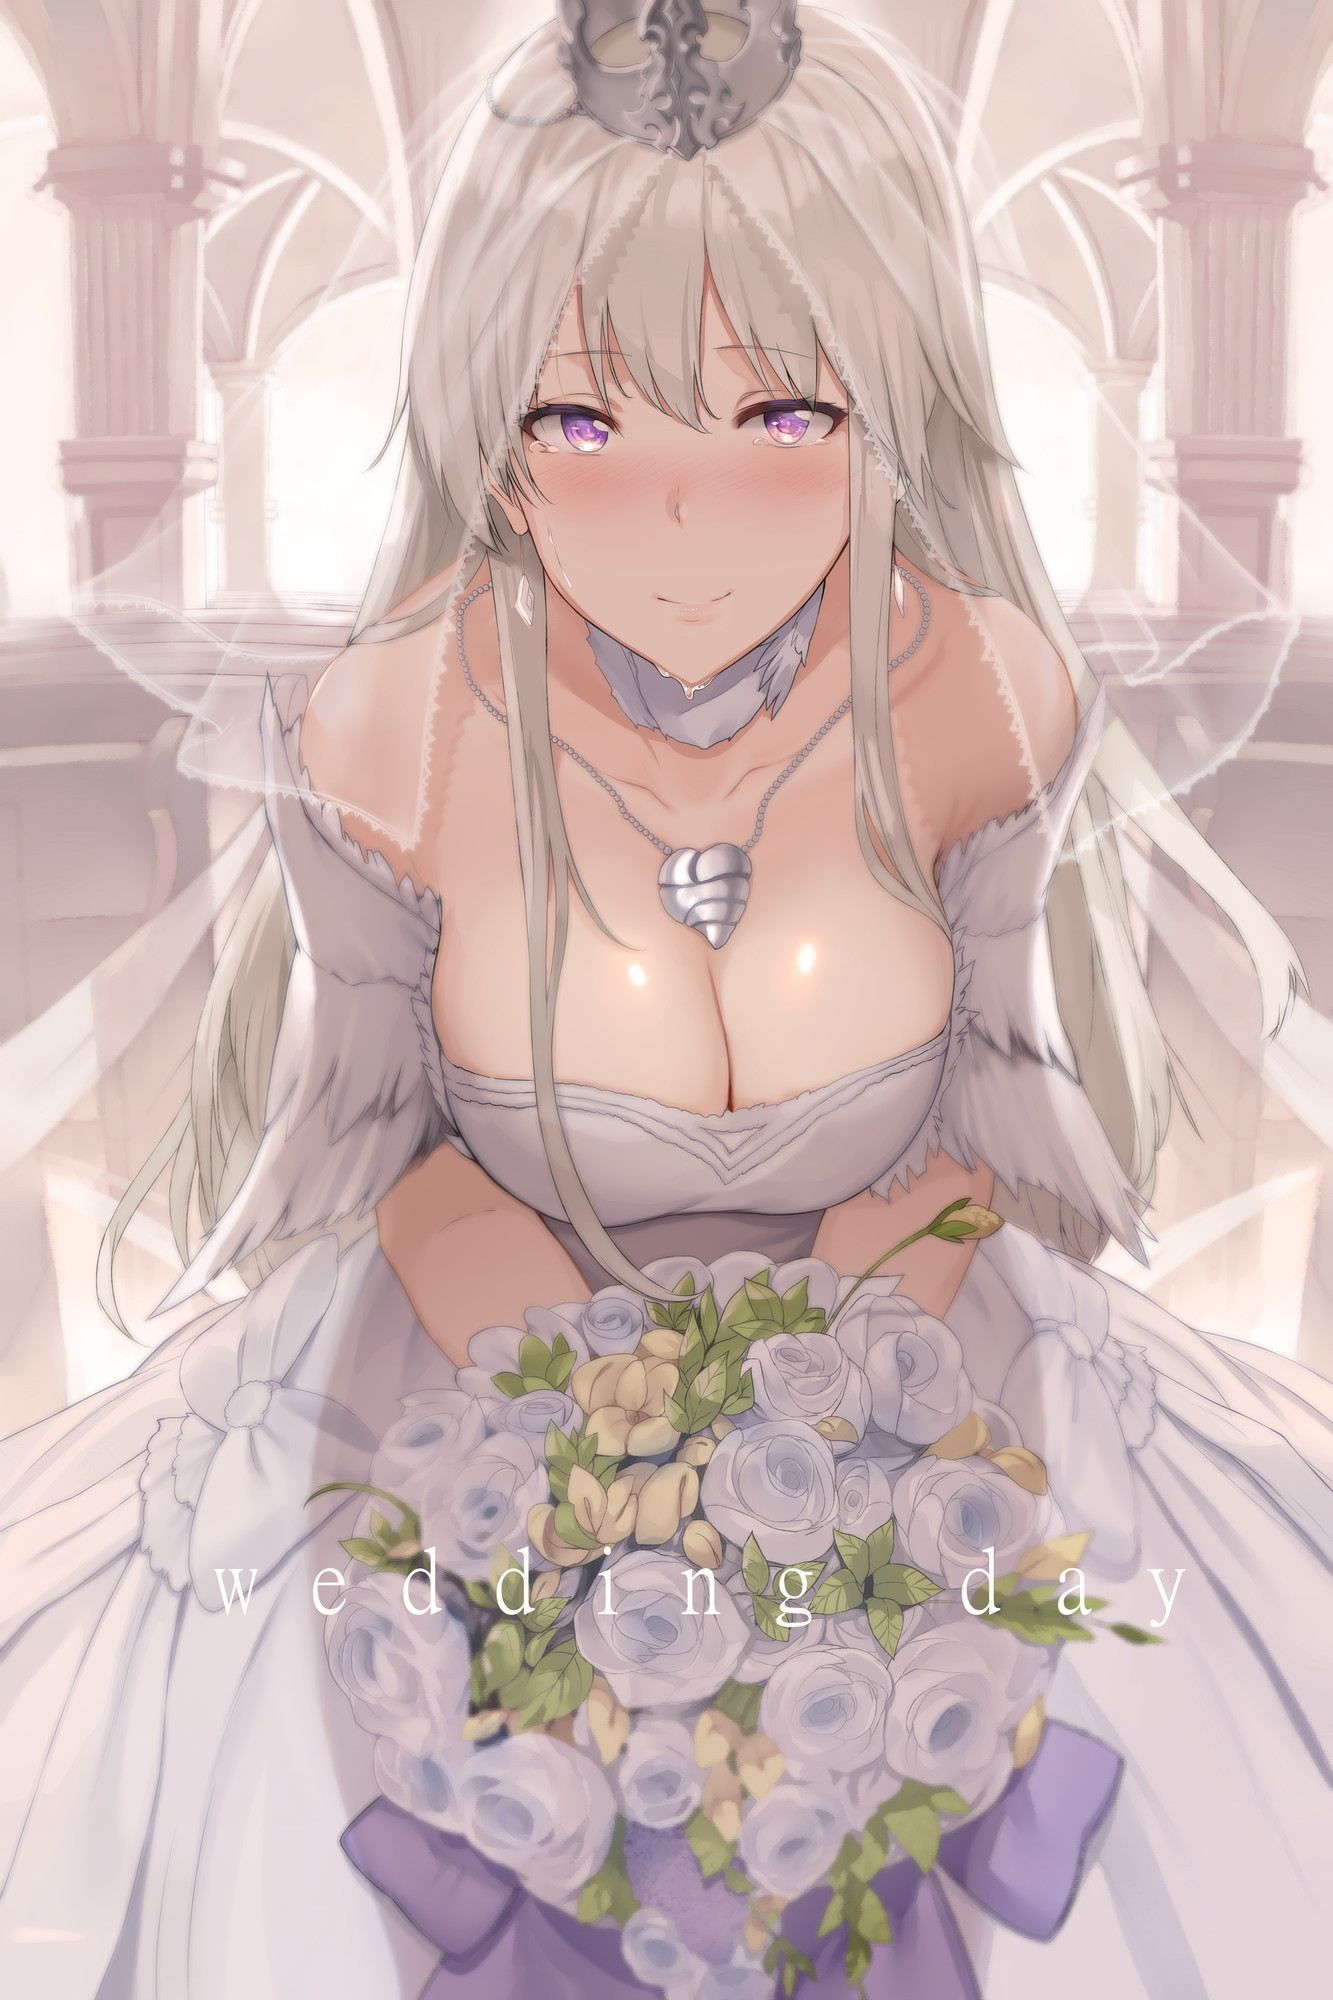 Gather people who want to see the erotic images of Azur Lane! 5